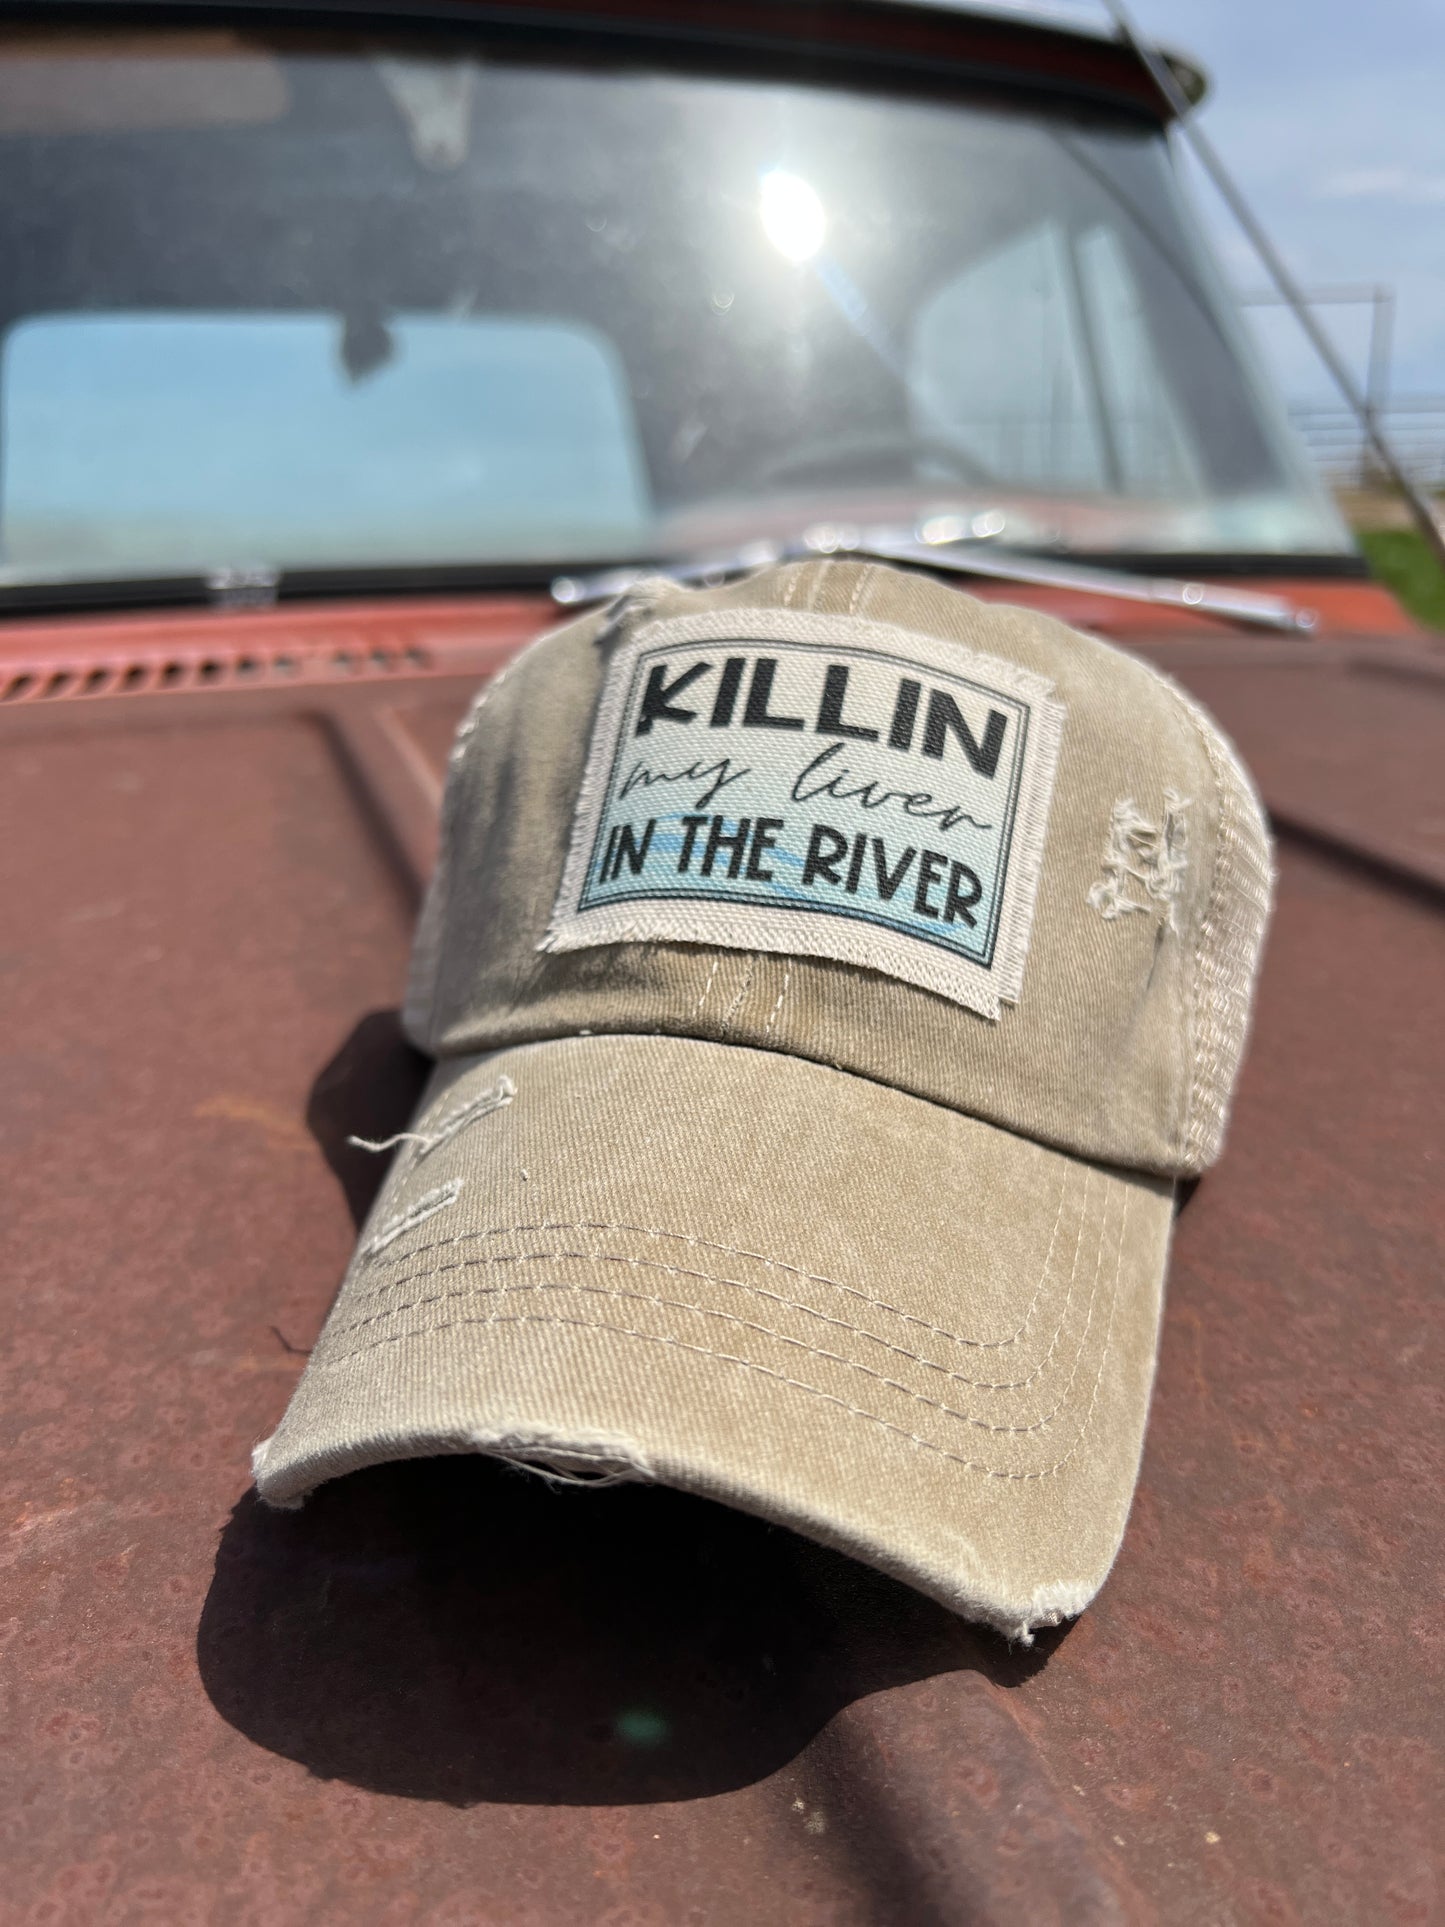 Khaki baseball cap with material patch with sayig " Killin my Liver  in the River" 